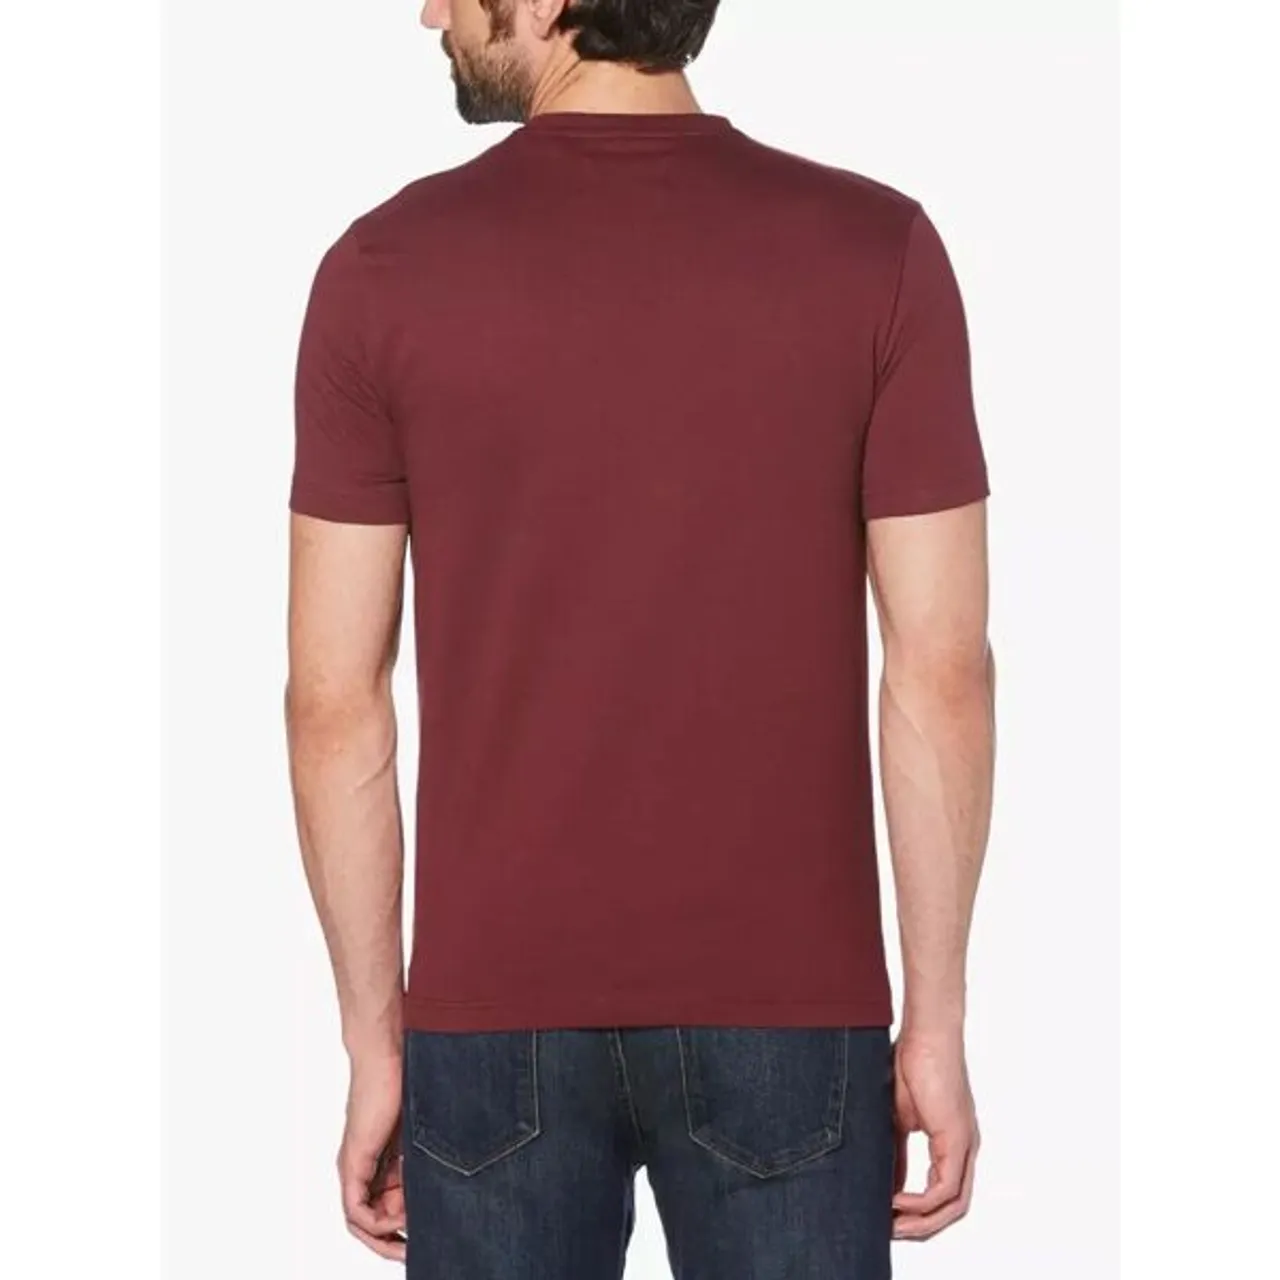 Original Penguin Pin Point Embroidery T-Shirt - Tawny Port - Male